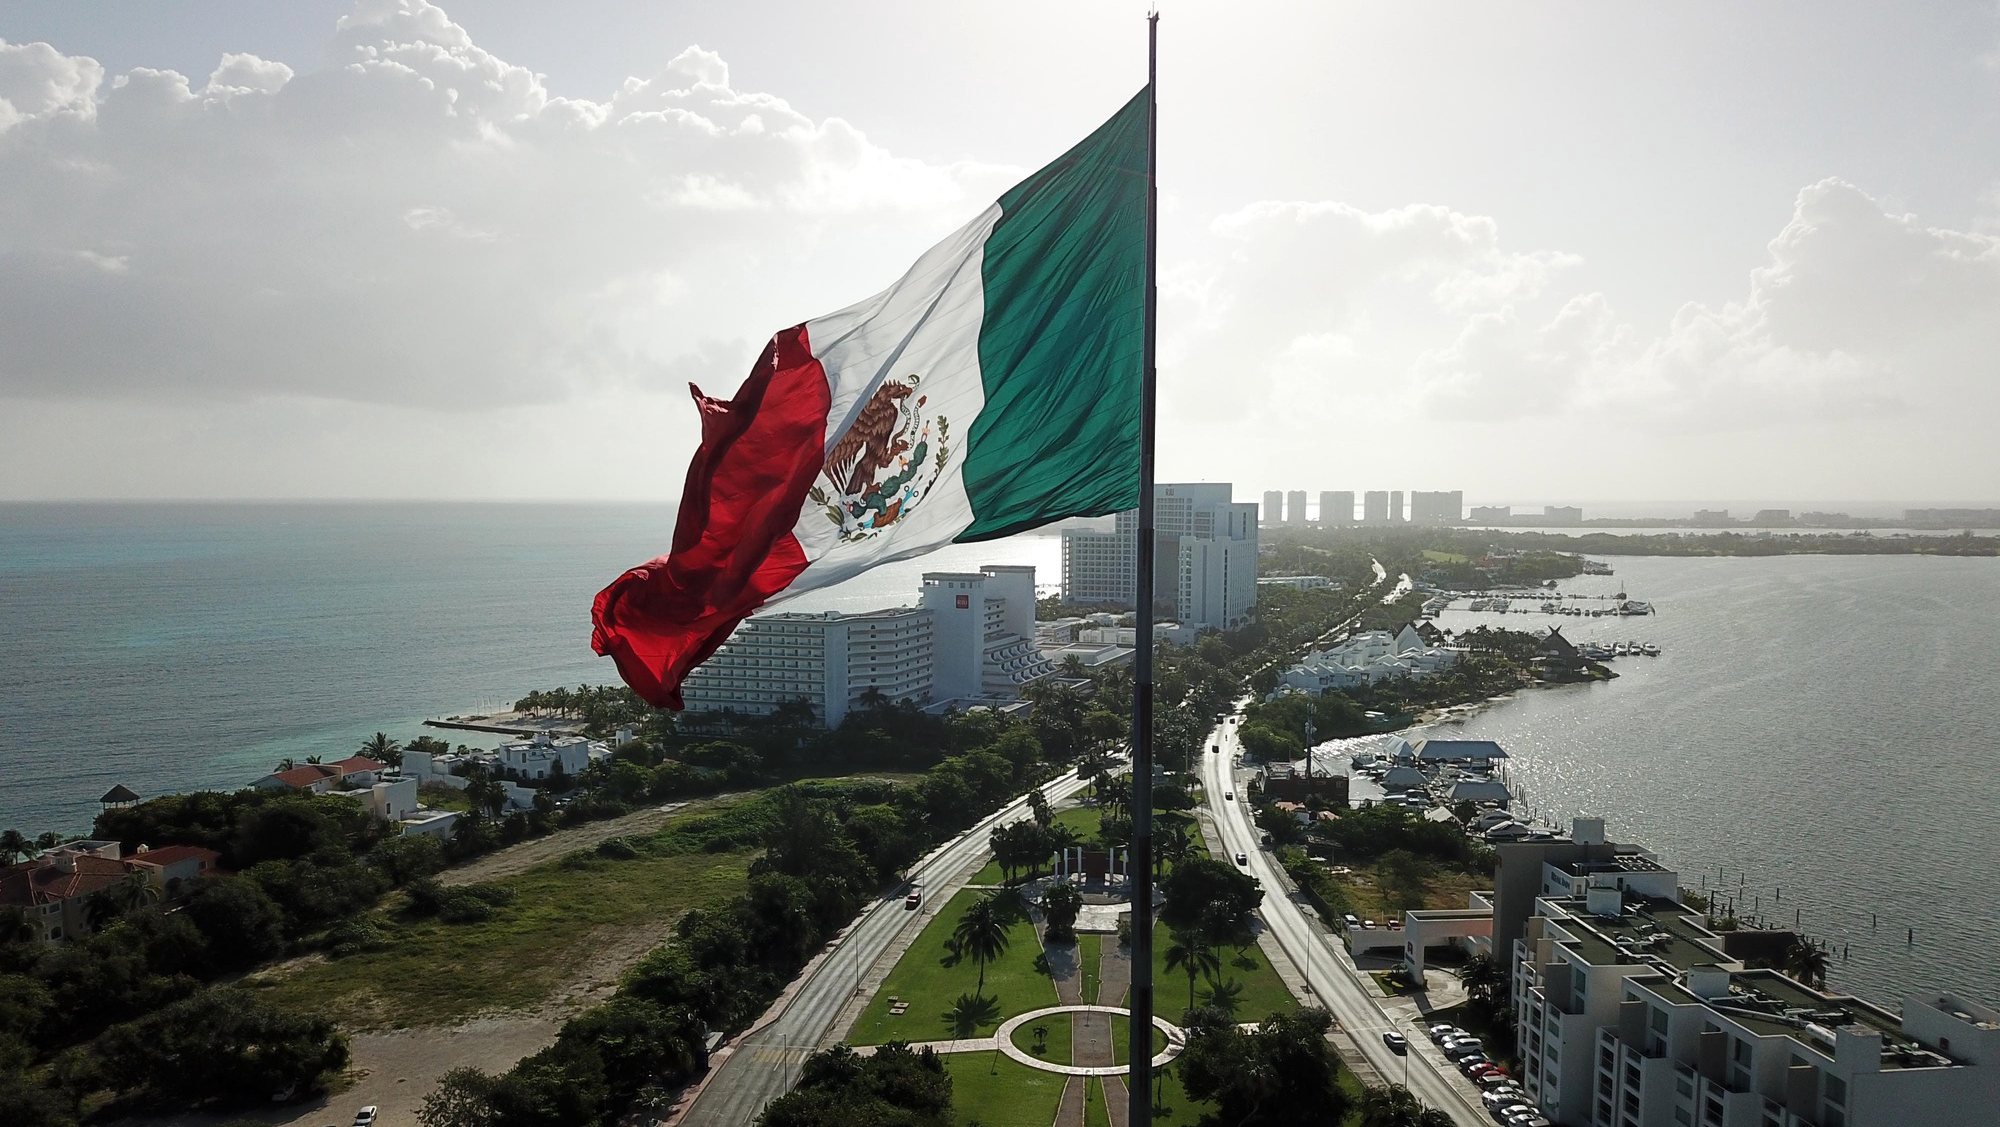 epa07393875 General view of a monumental flag of Mexico in Cancun, Quintana Roo, Mexico, 24 February 2019. The resort of Cancun, in the Mexican Caribbean, is one of the 15 points where monumental flags of Mexico wave and its care requires special treatment by a group of experts from the Mexican Army and the Secretariat of National Defense. The flags measure 50 meters long by 26 meters wide and weigh about 200 kilos, while each of them measures more than 100 meters in height.  EPA/ALONSO CUPUL